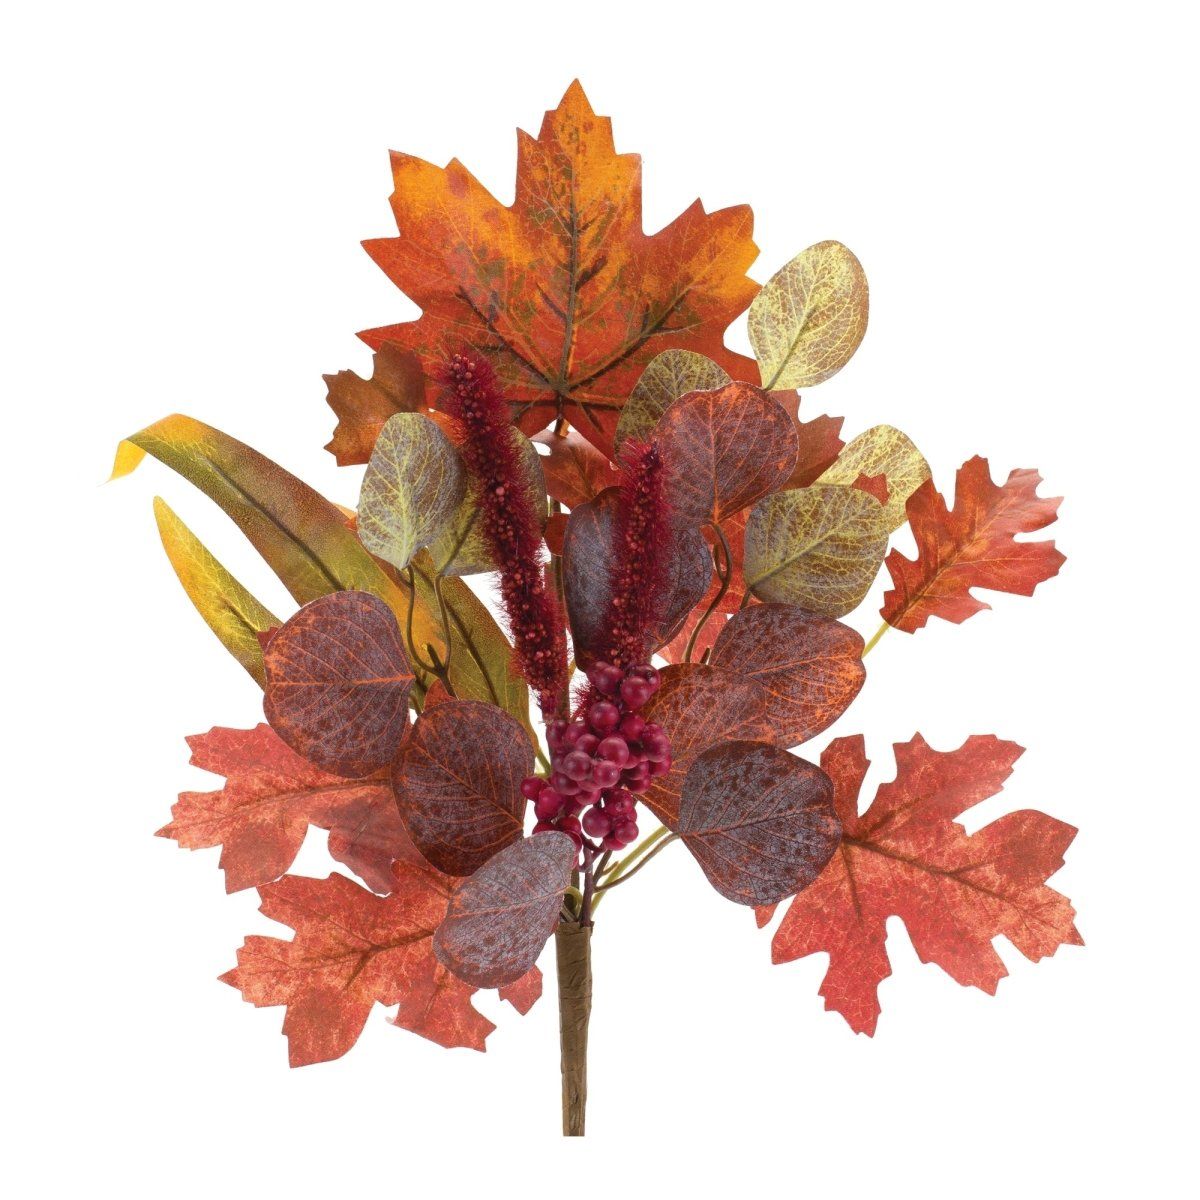 Shop For 16" Mixed Fall Leaf Spray (Set of 6) 87539DS